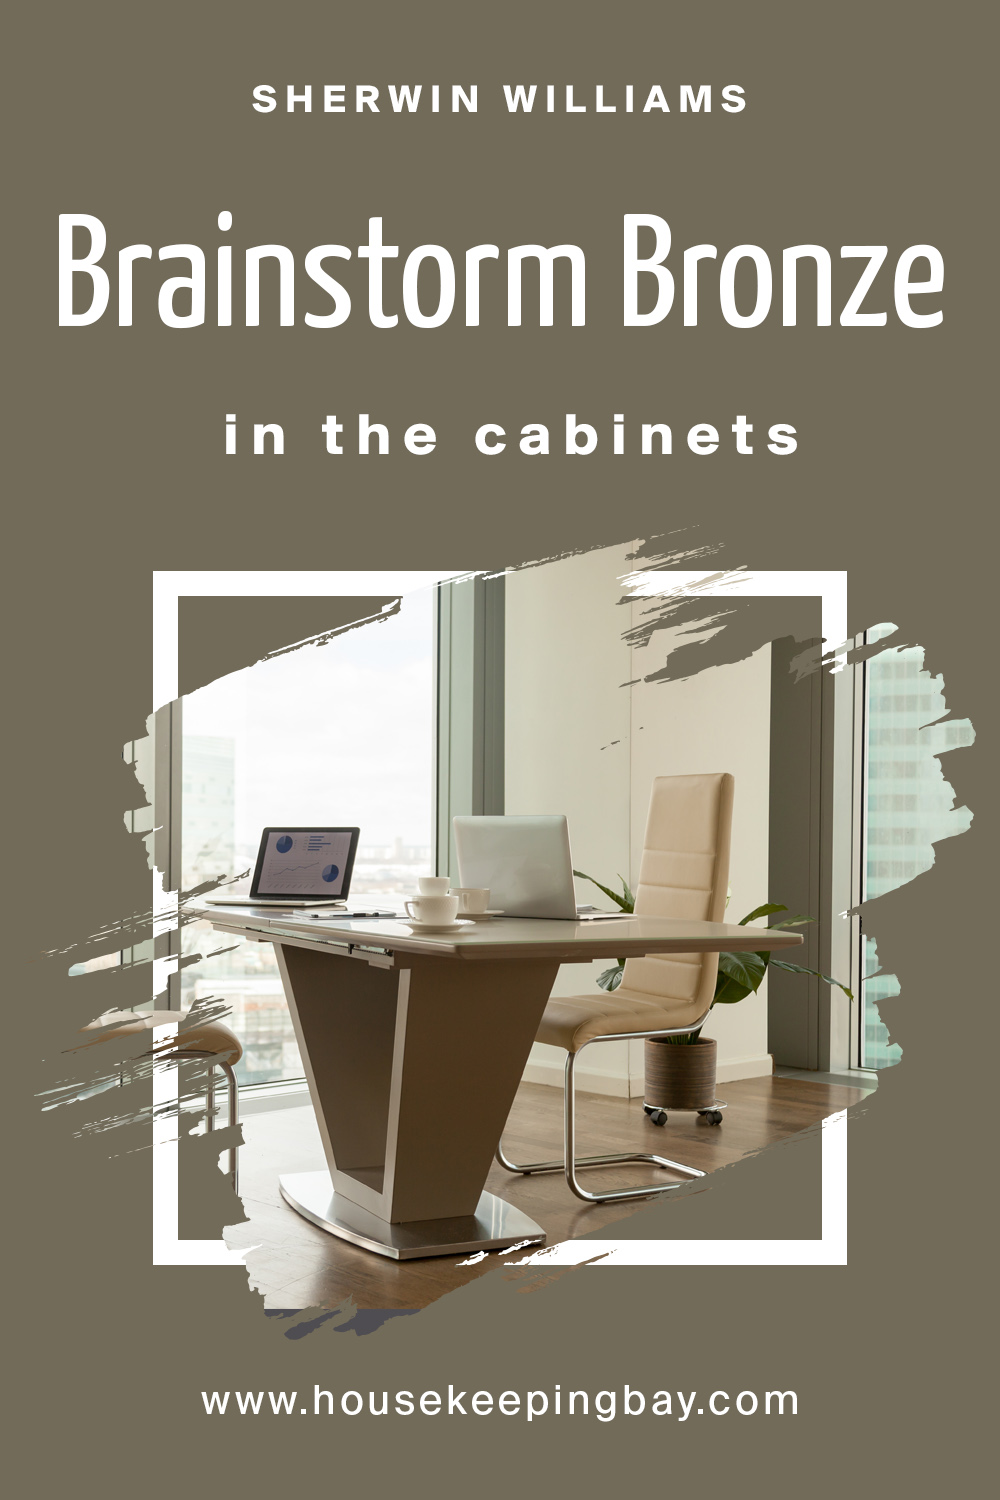 Brainstorm Bronze For the cabinets